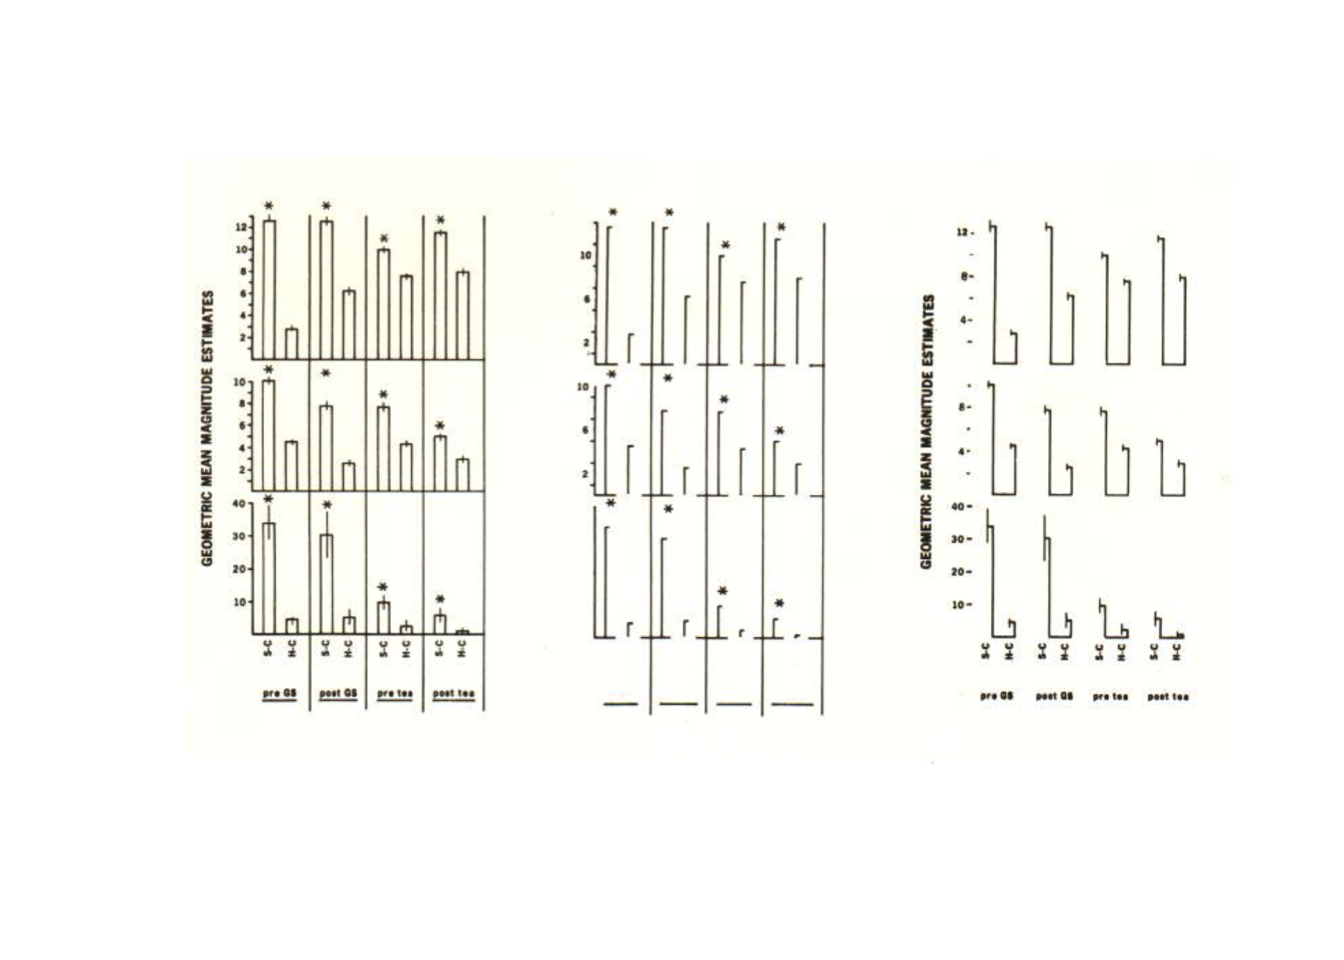 An extreme example of Tufte's reduction in unnecessary ink in graphics. *Tufte proposed moving from the figure on the left, to the reduced figure on the right (the center is what was dropped out)* [image link](https://benjaminleroy.github.io/pages/blog/static/images/extreme_reduction.png)